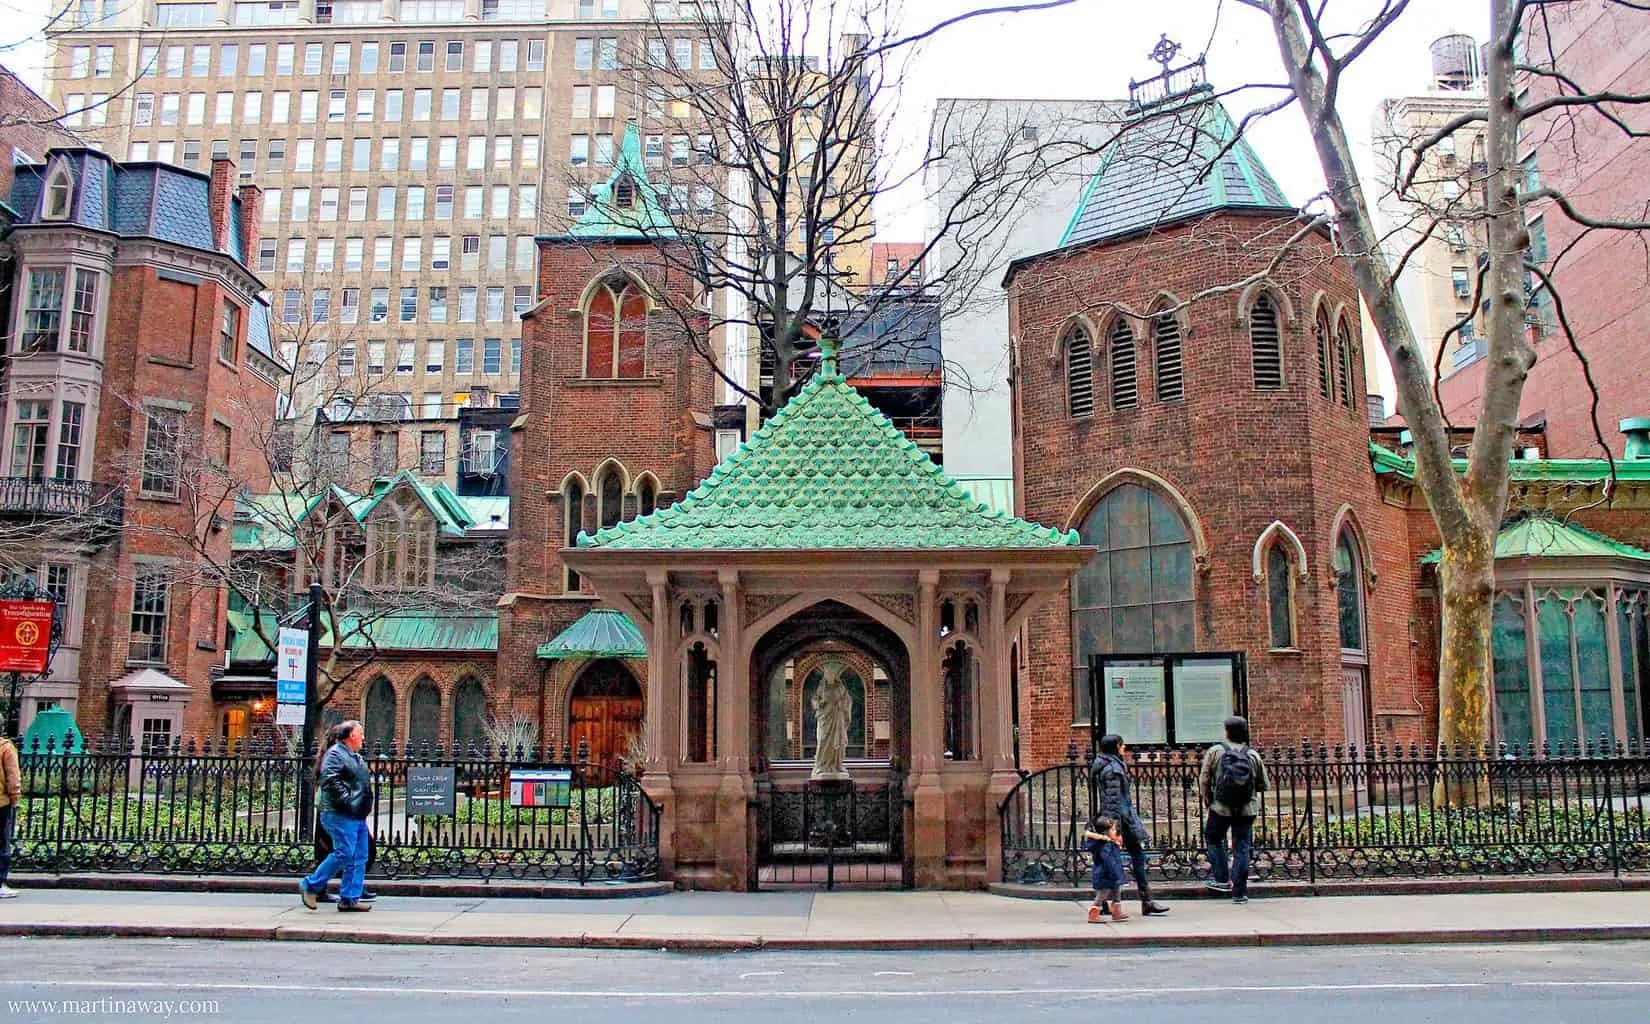 The charming, English country feel of the brick-walled, green-roofed, Church of the Transfiguration in New York City (image sourced from Flickr.com). 